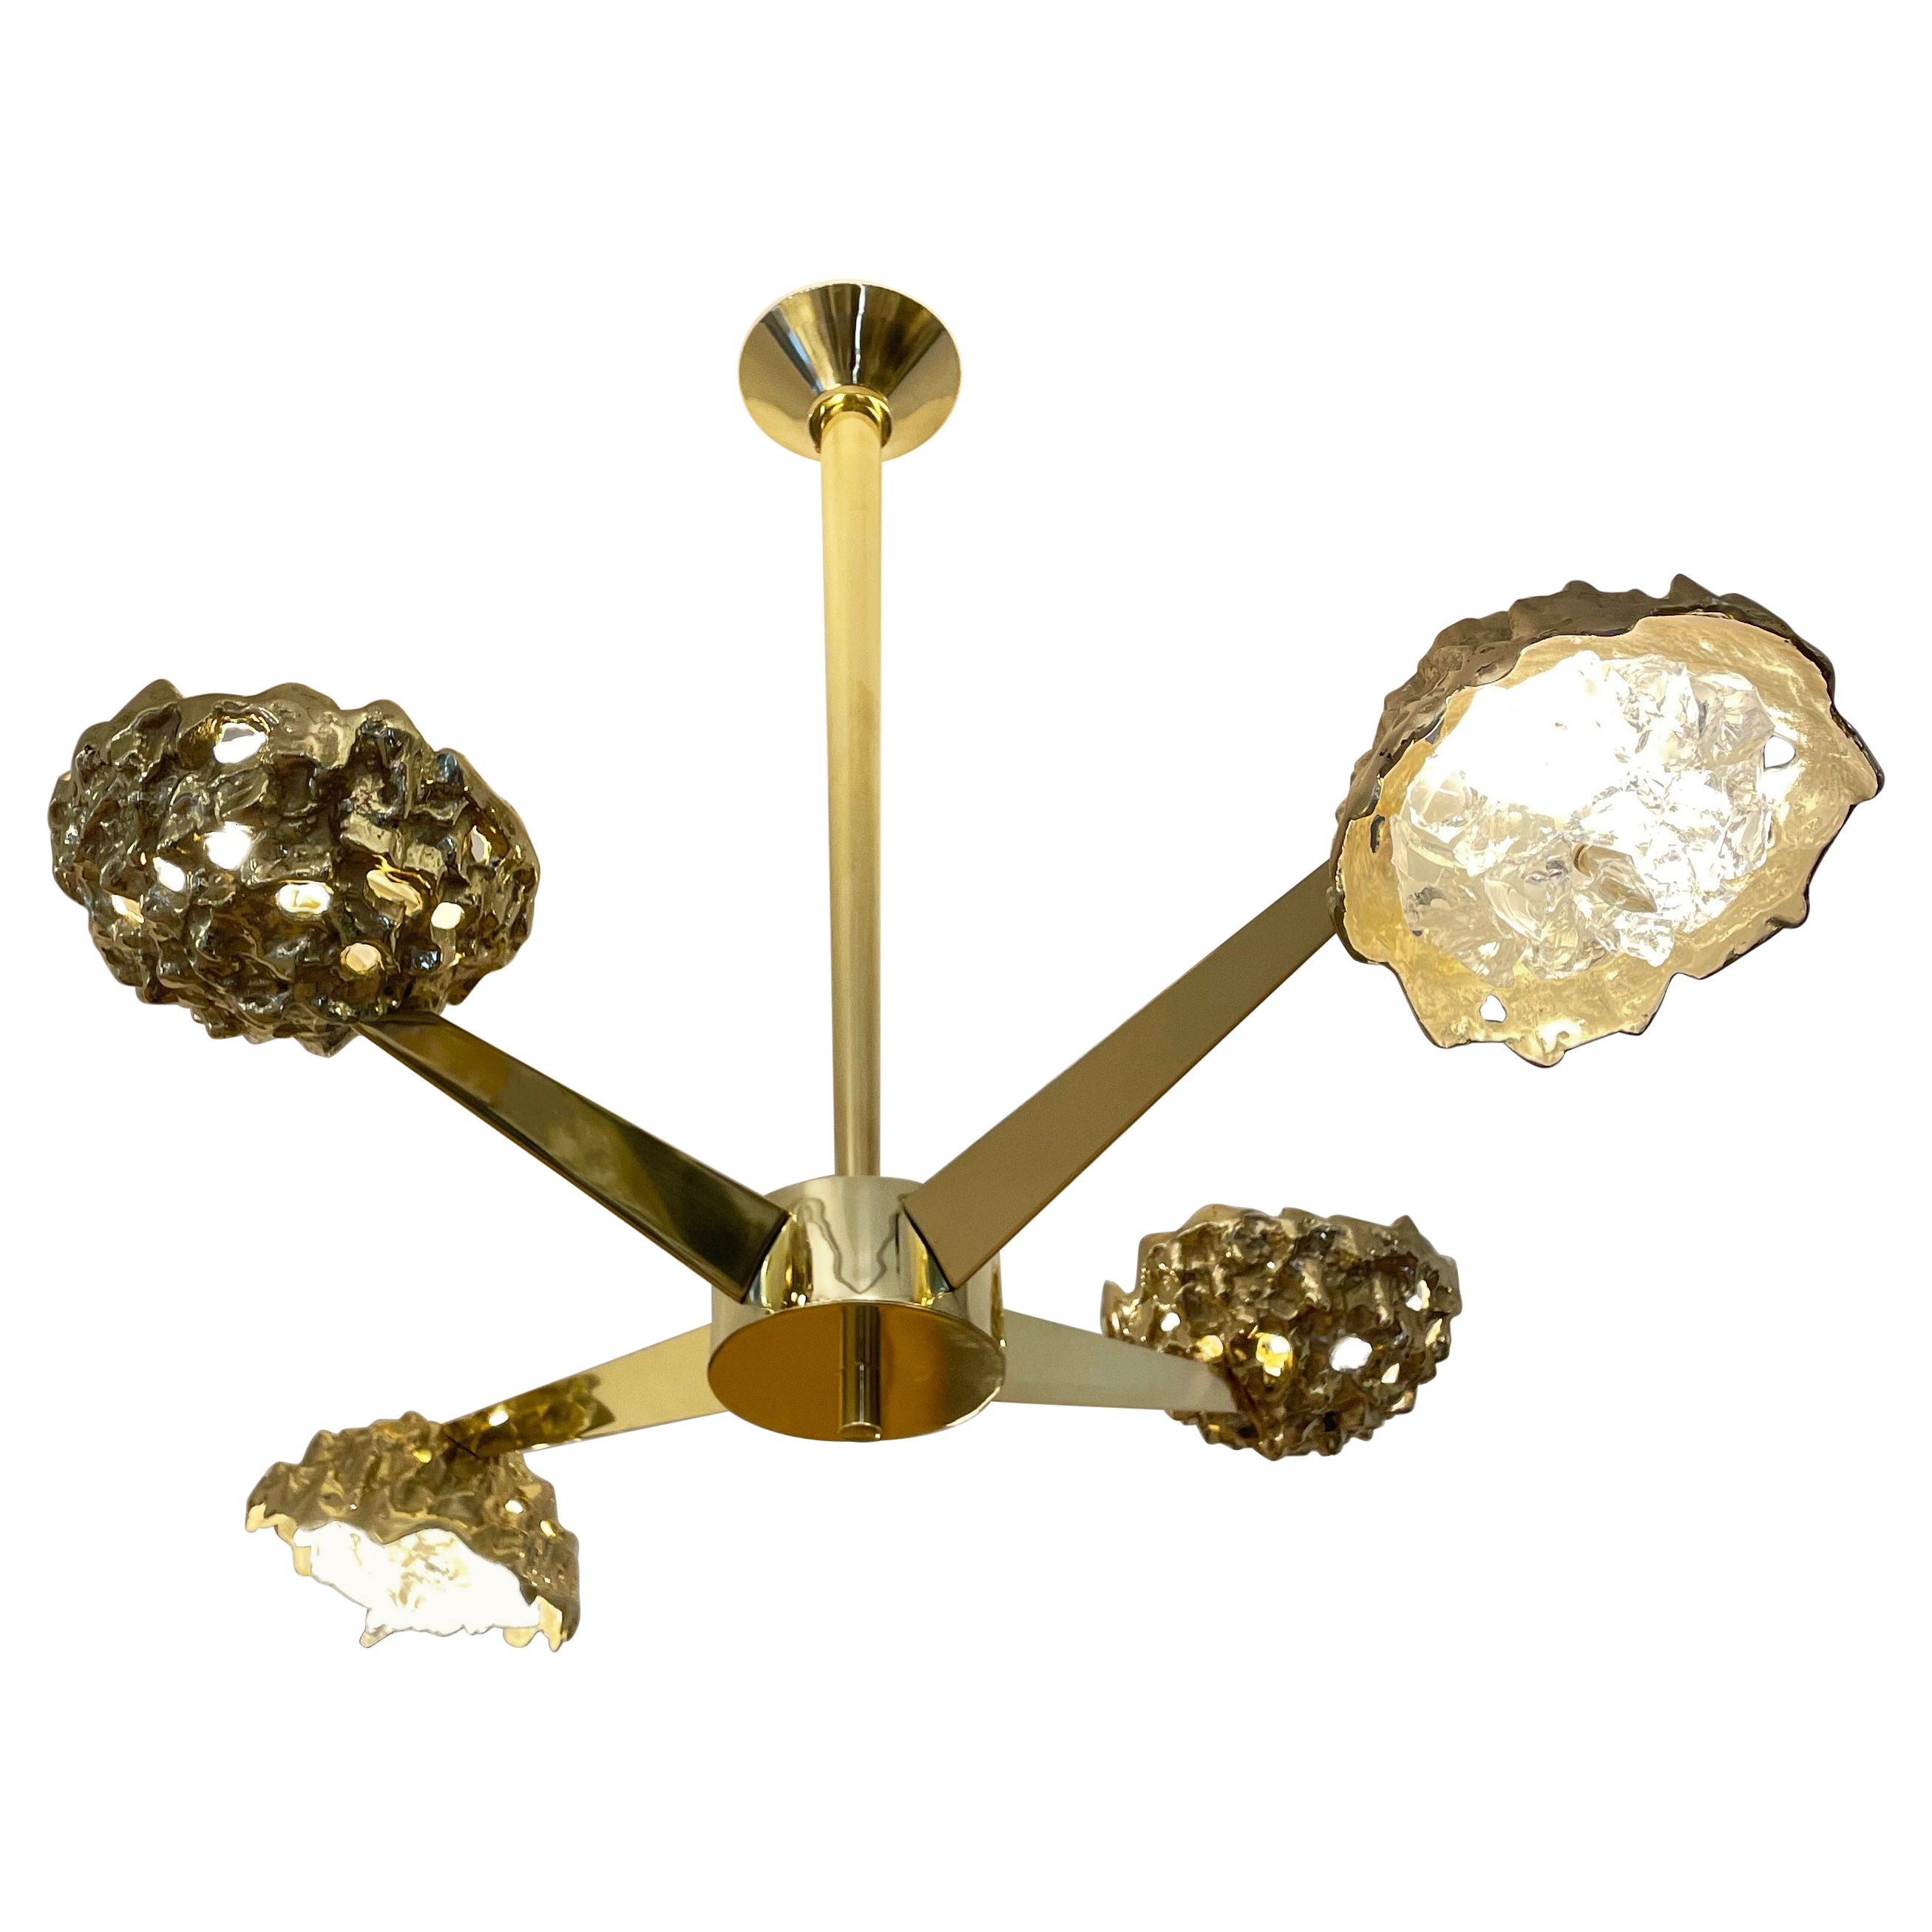 Fusione N.4 Ceiling Light by Gaspare Asaro